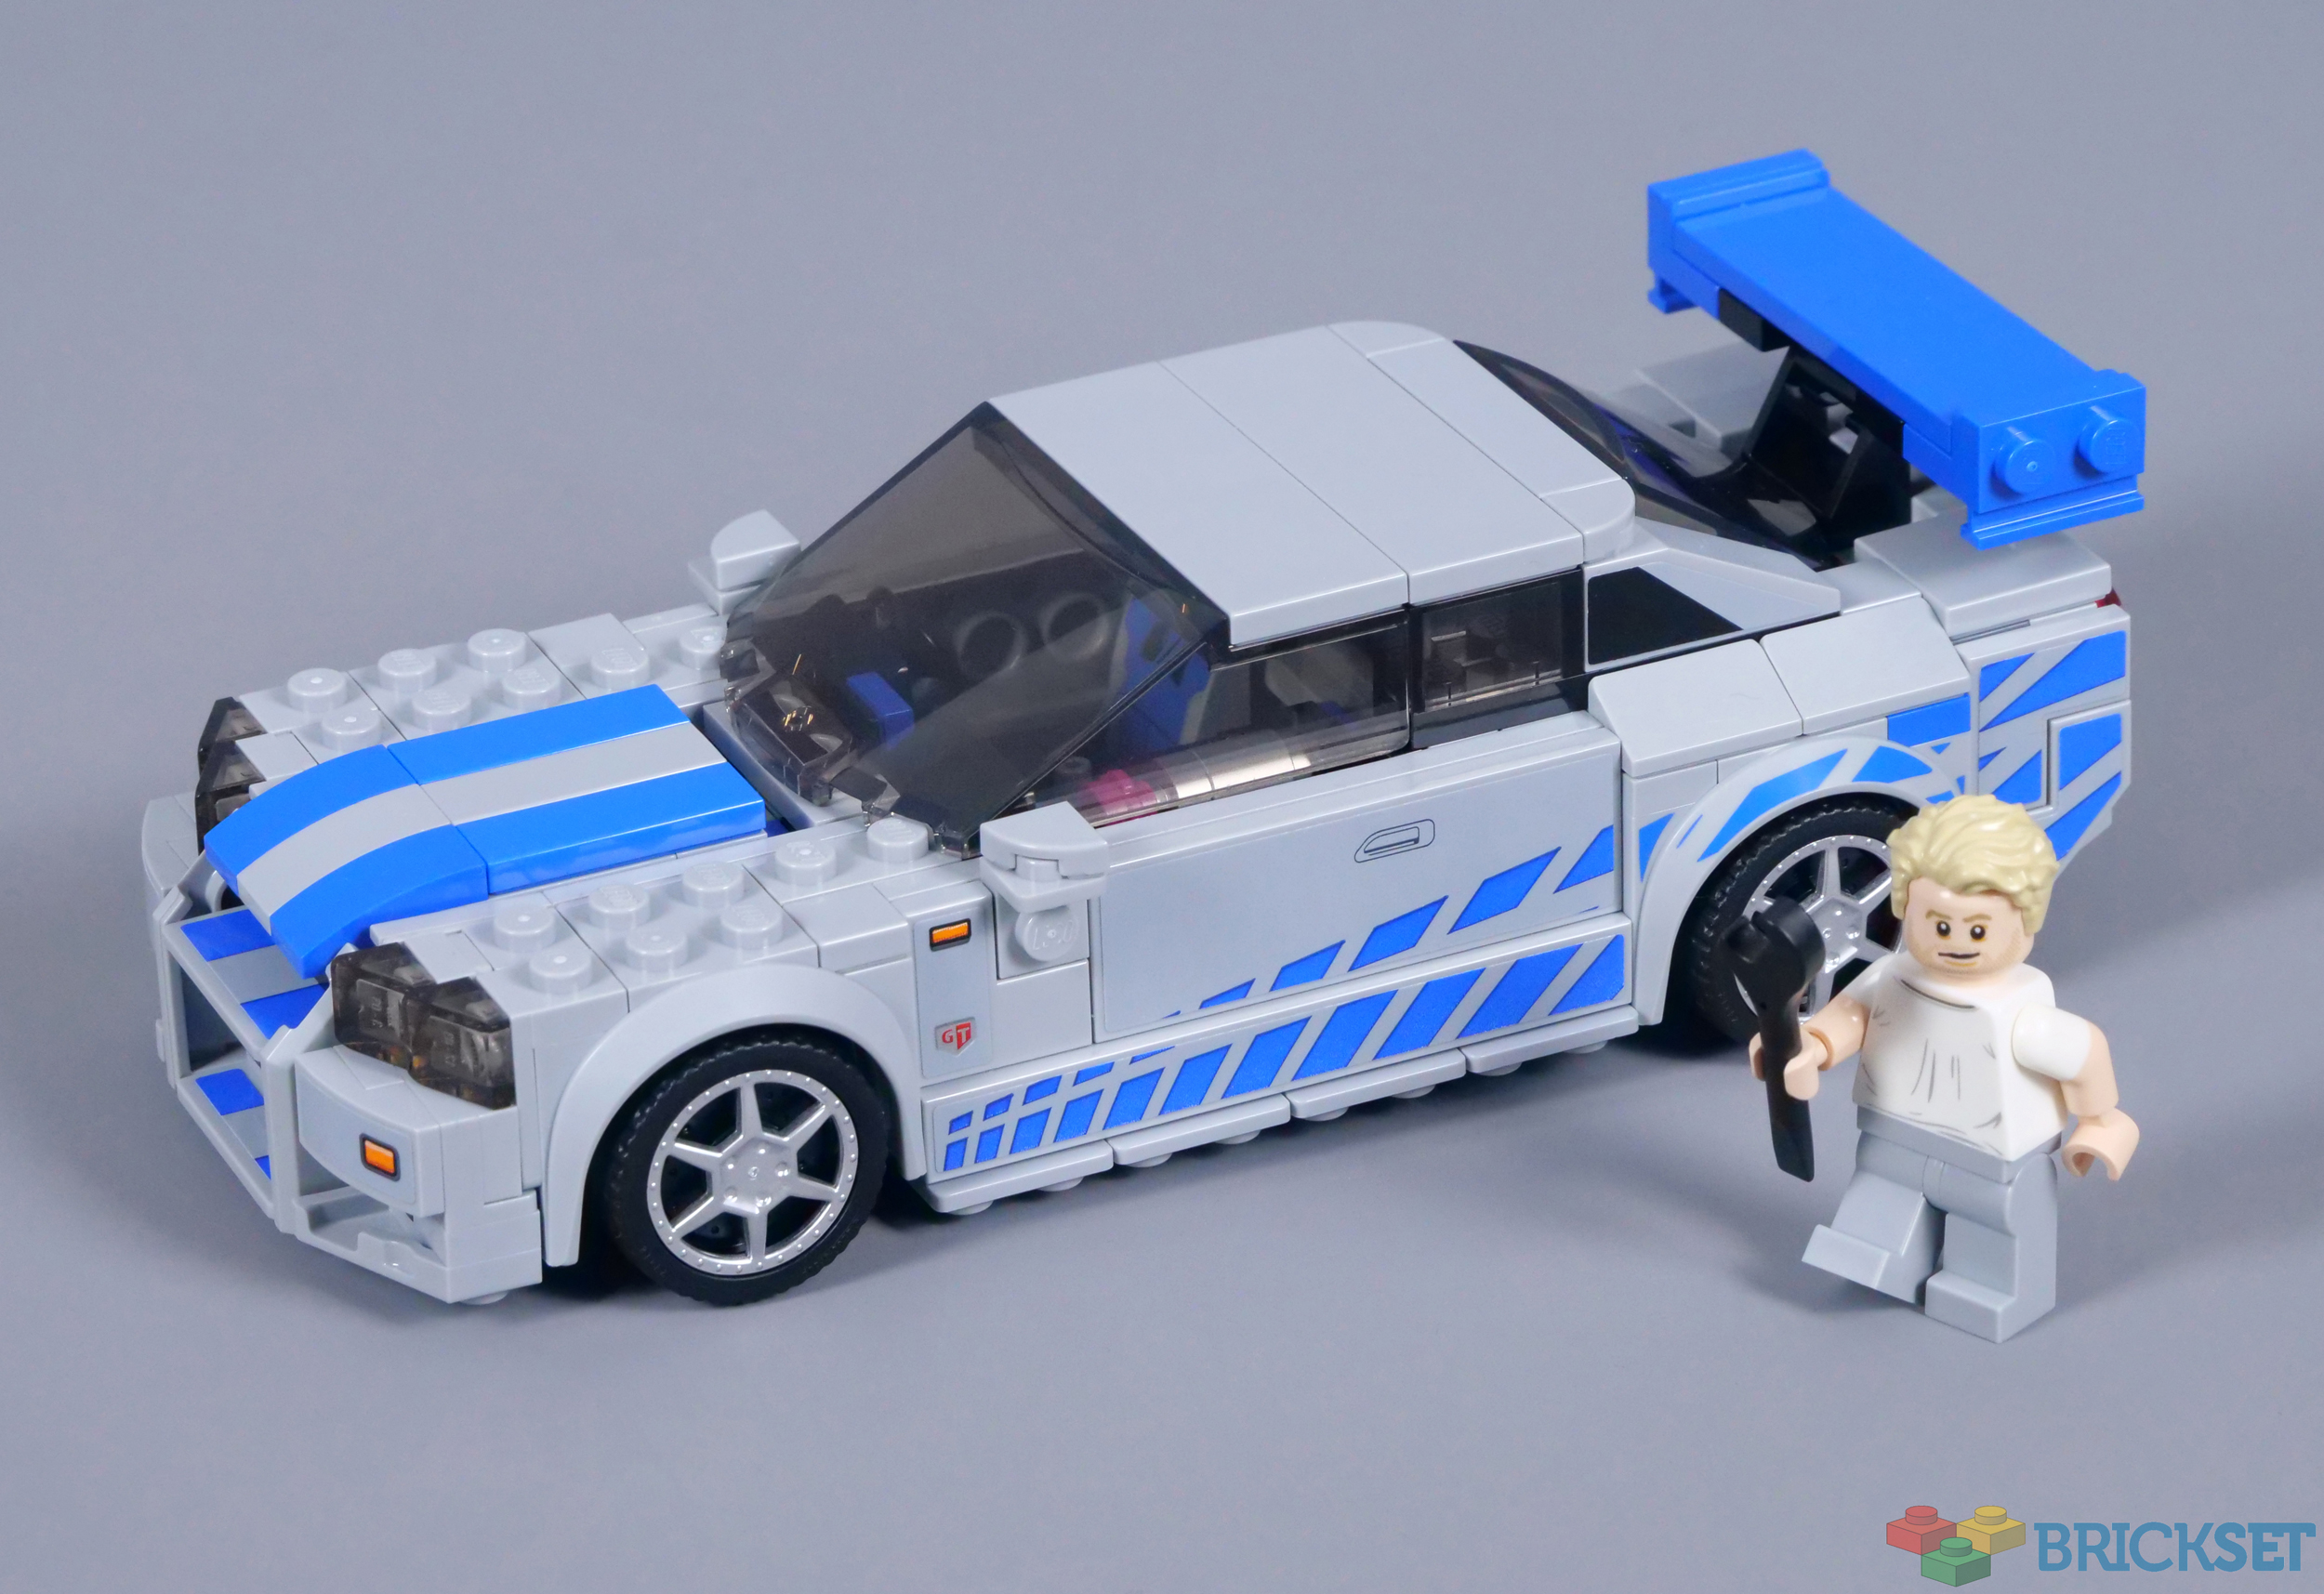 New Lego Speed Champions R34 Nissan GT-R '2 Fast 2 Furious' Comes